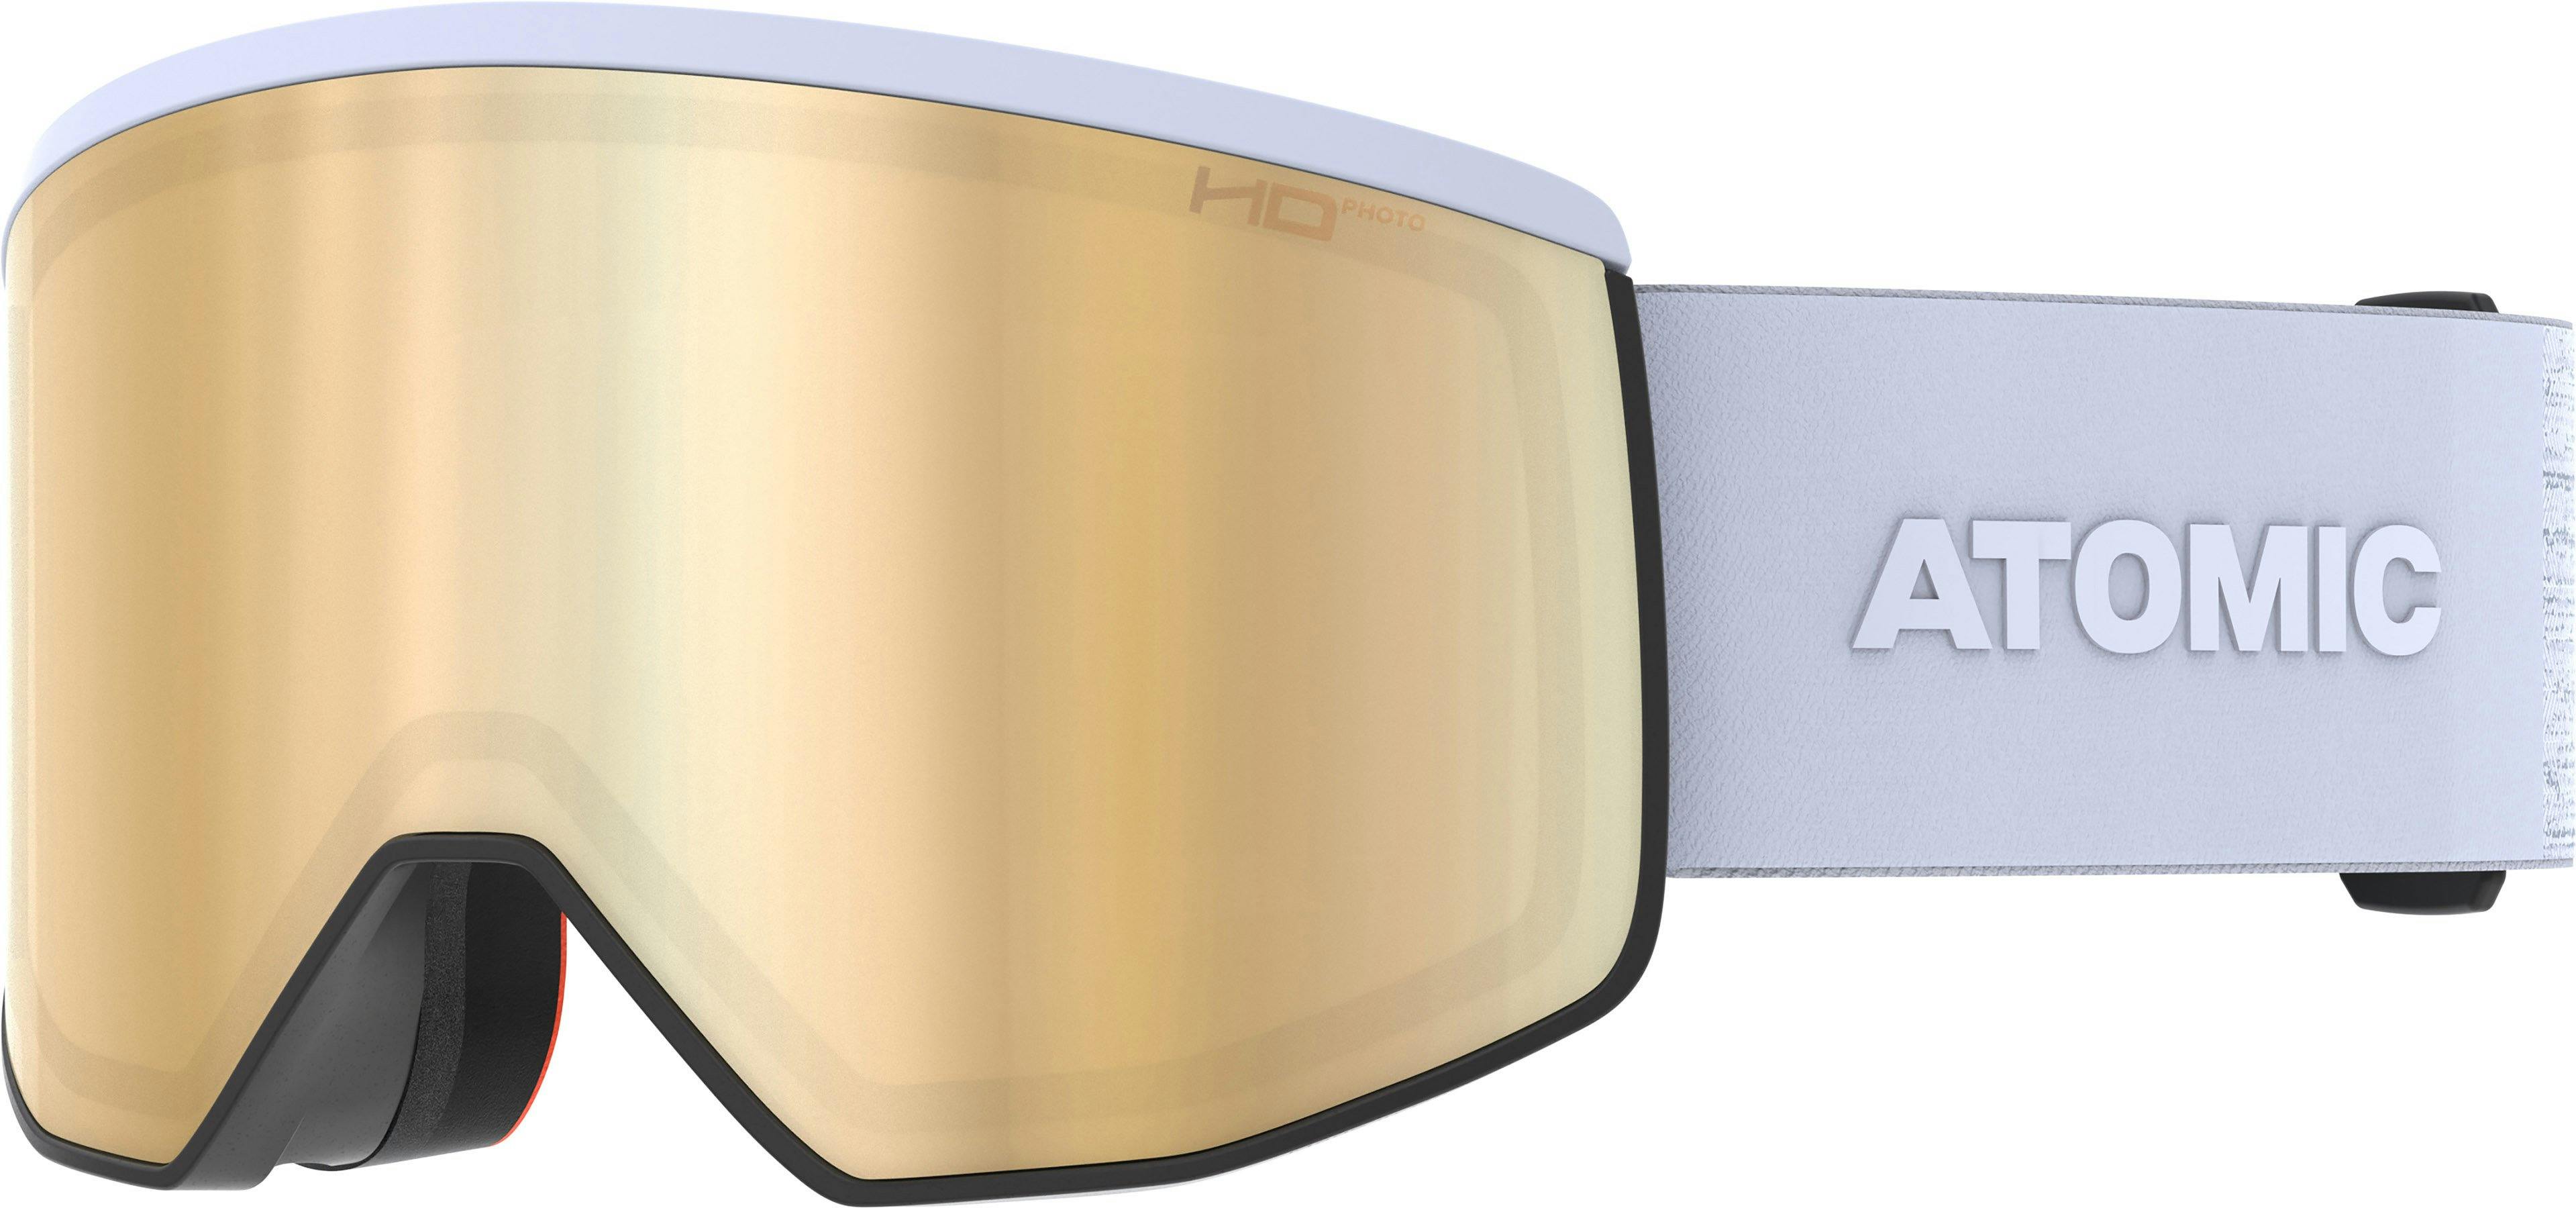 Product image for Four Pro HD Photo Goggles